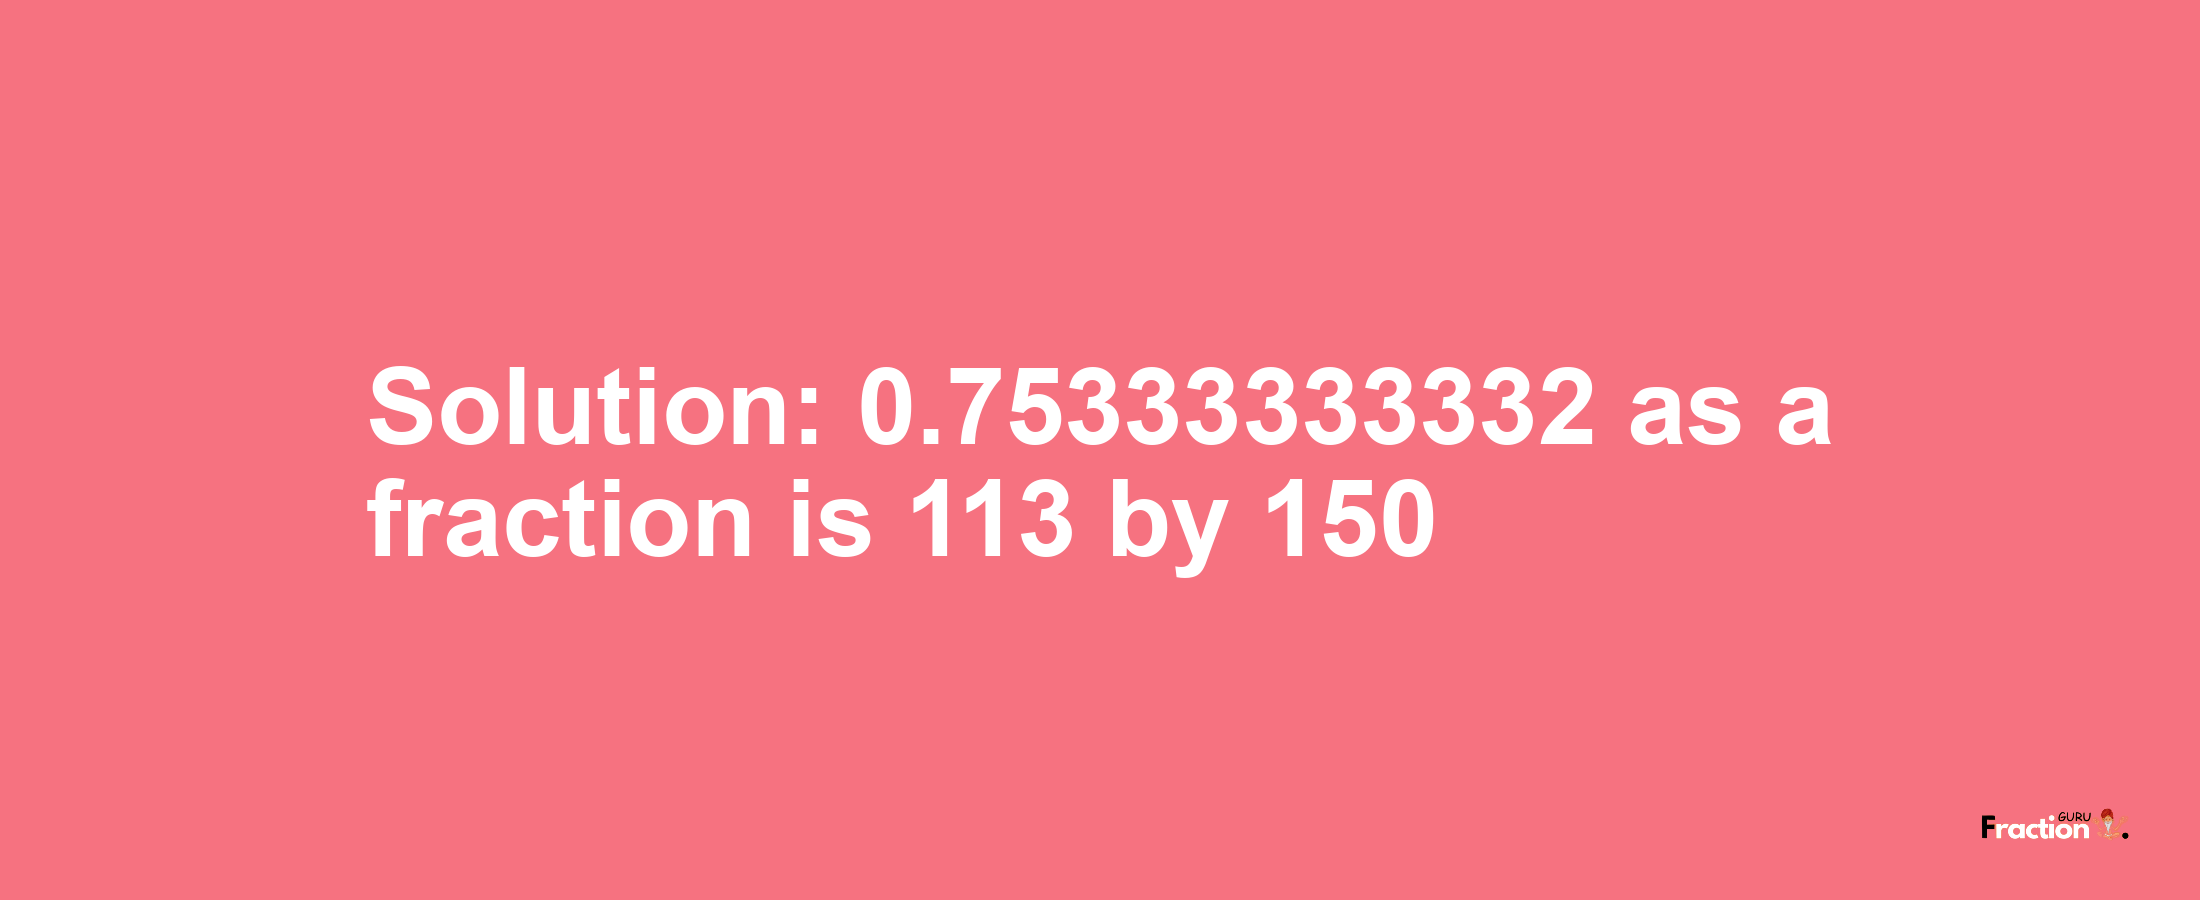 Solution:0.75333333332 as a fraction is 113/150